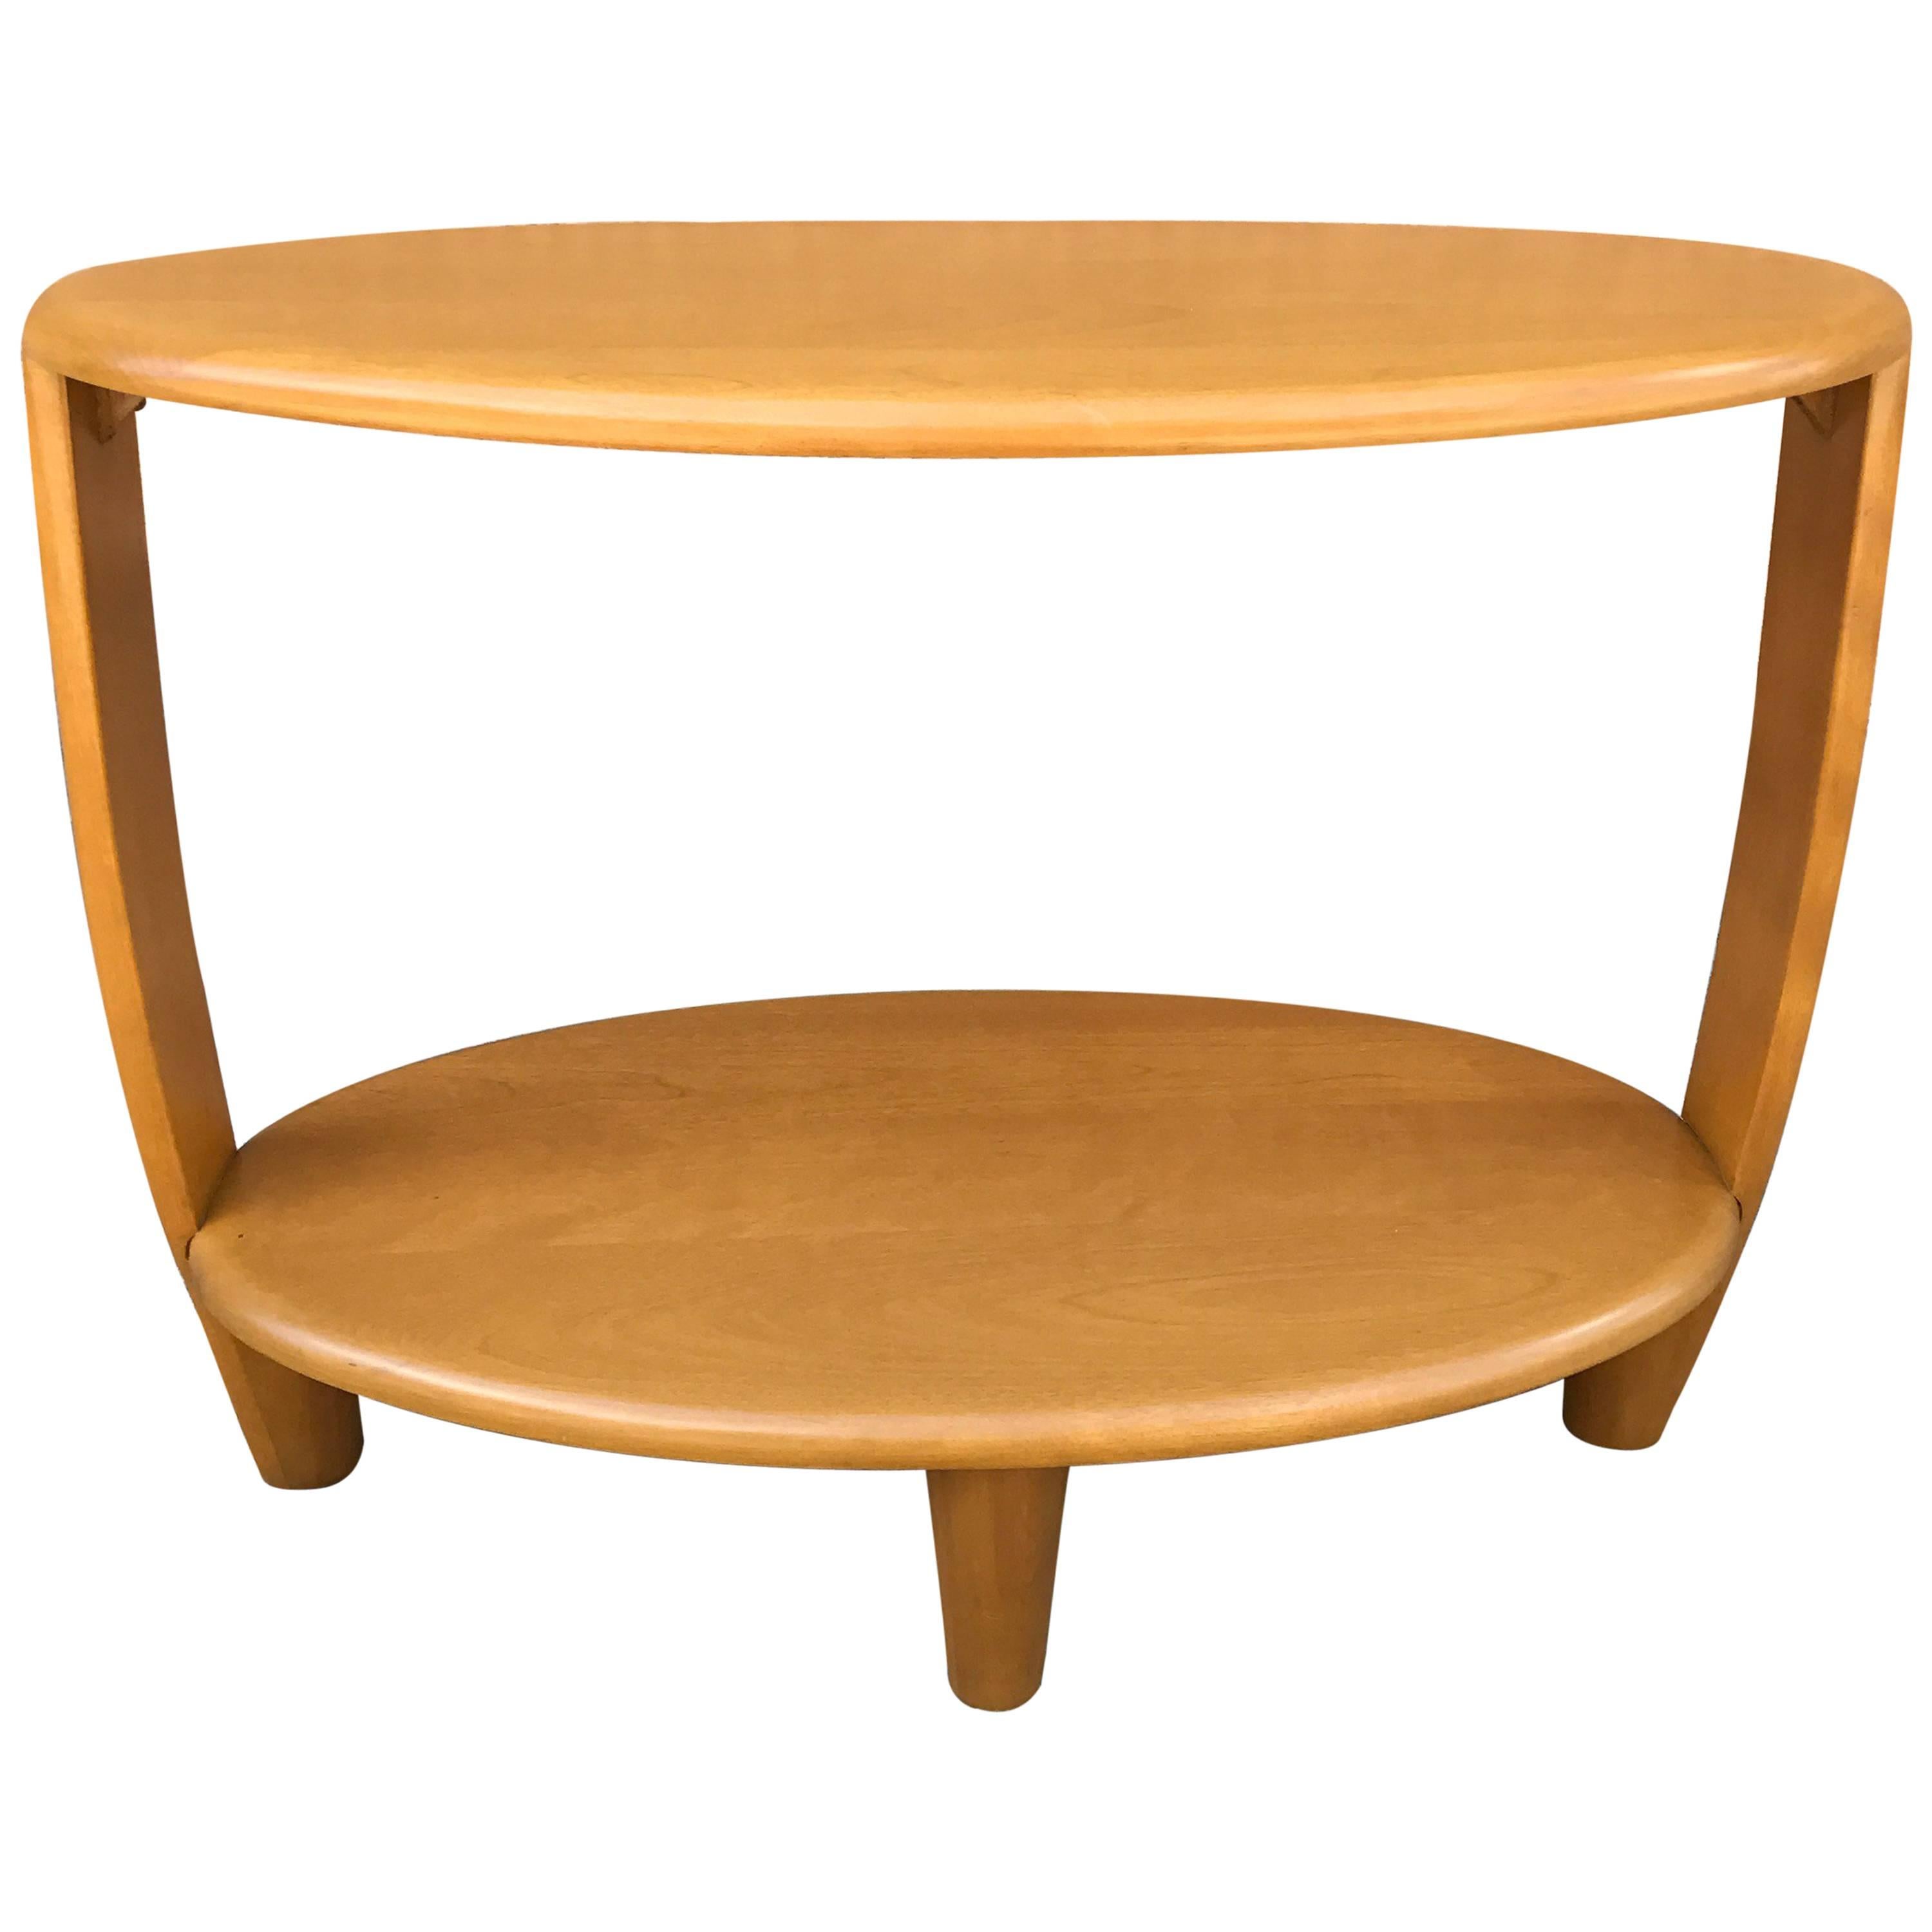 Tiered Oval Maple Side Table by Heywood Wakefield